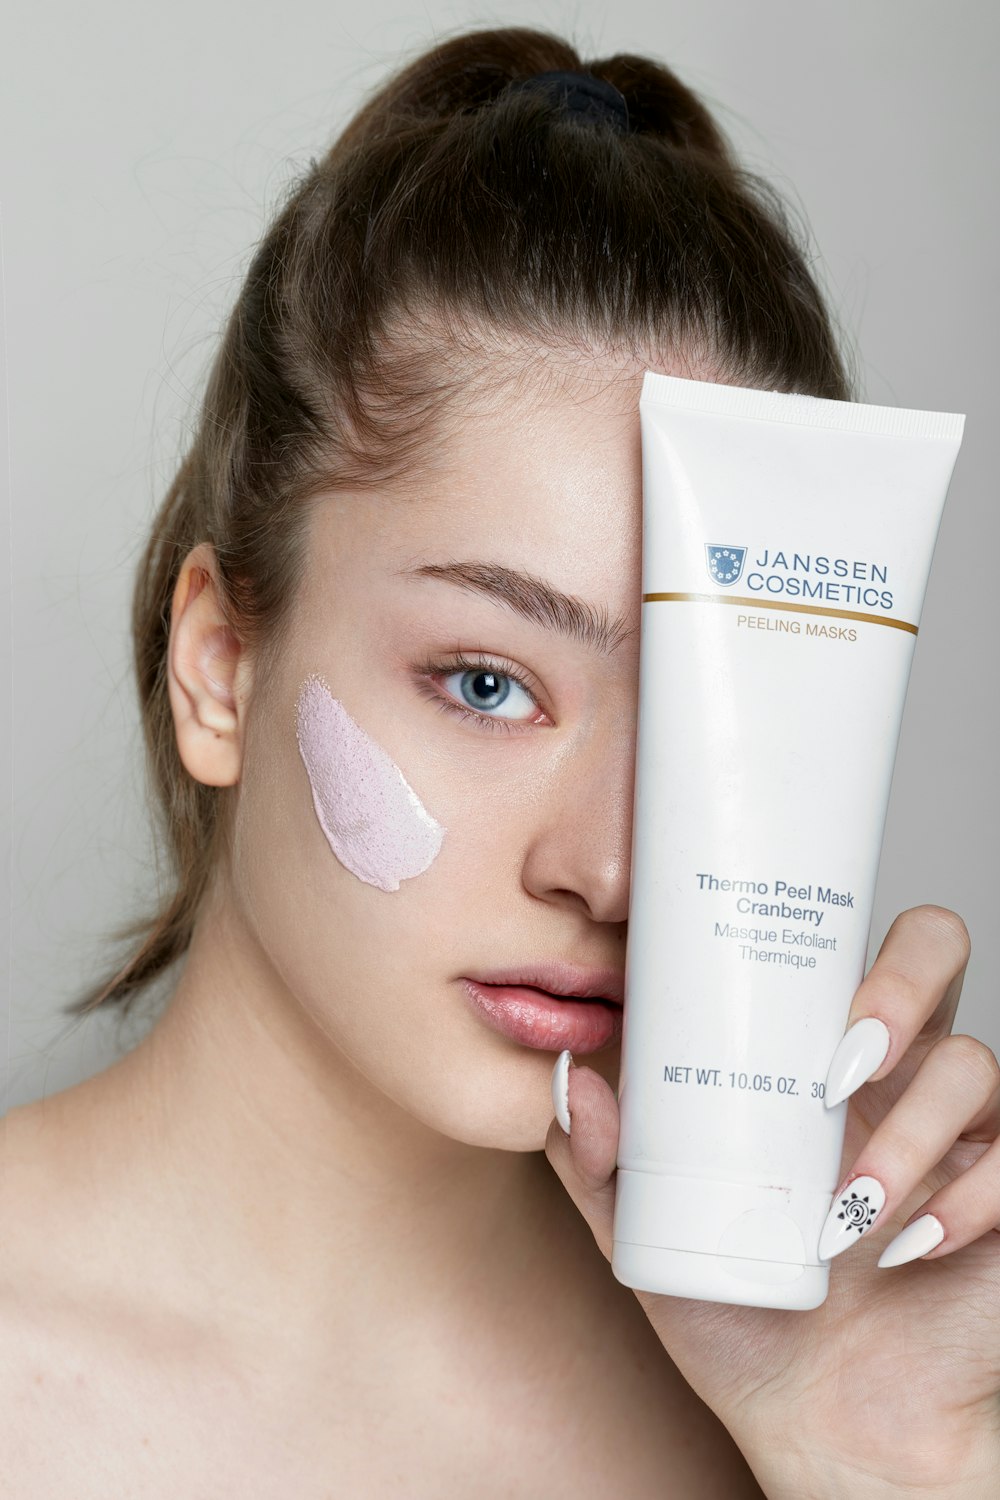 a woman holding a tube of sunscreen next to her face